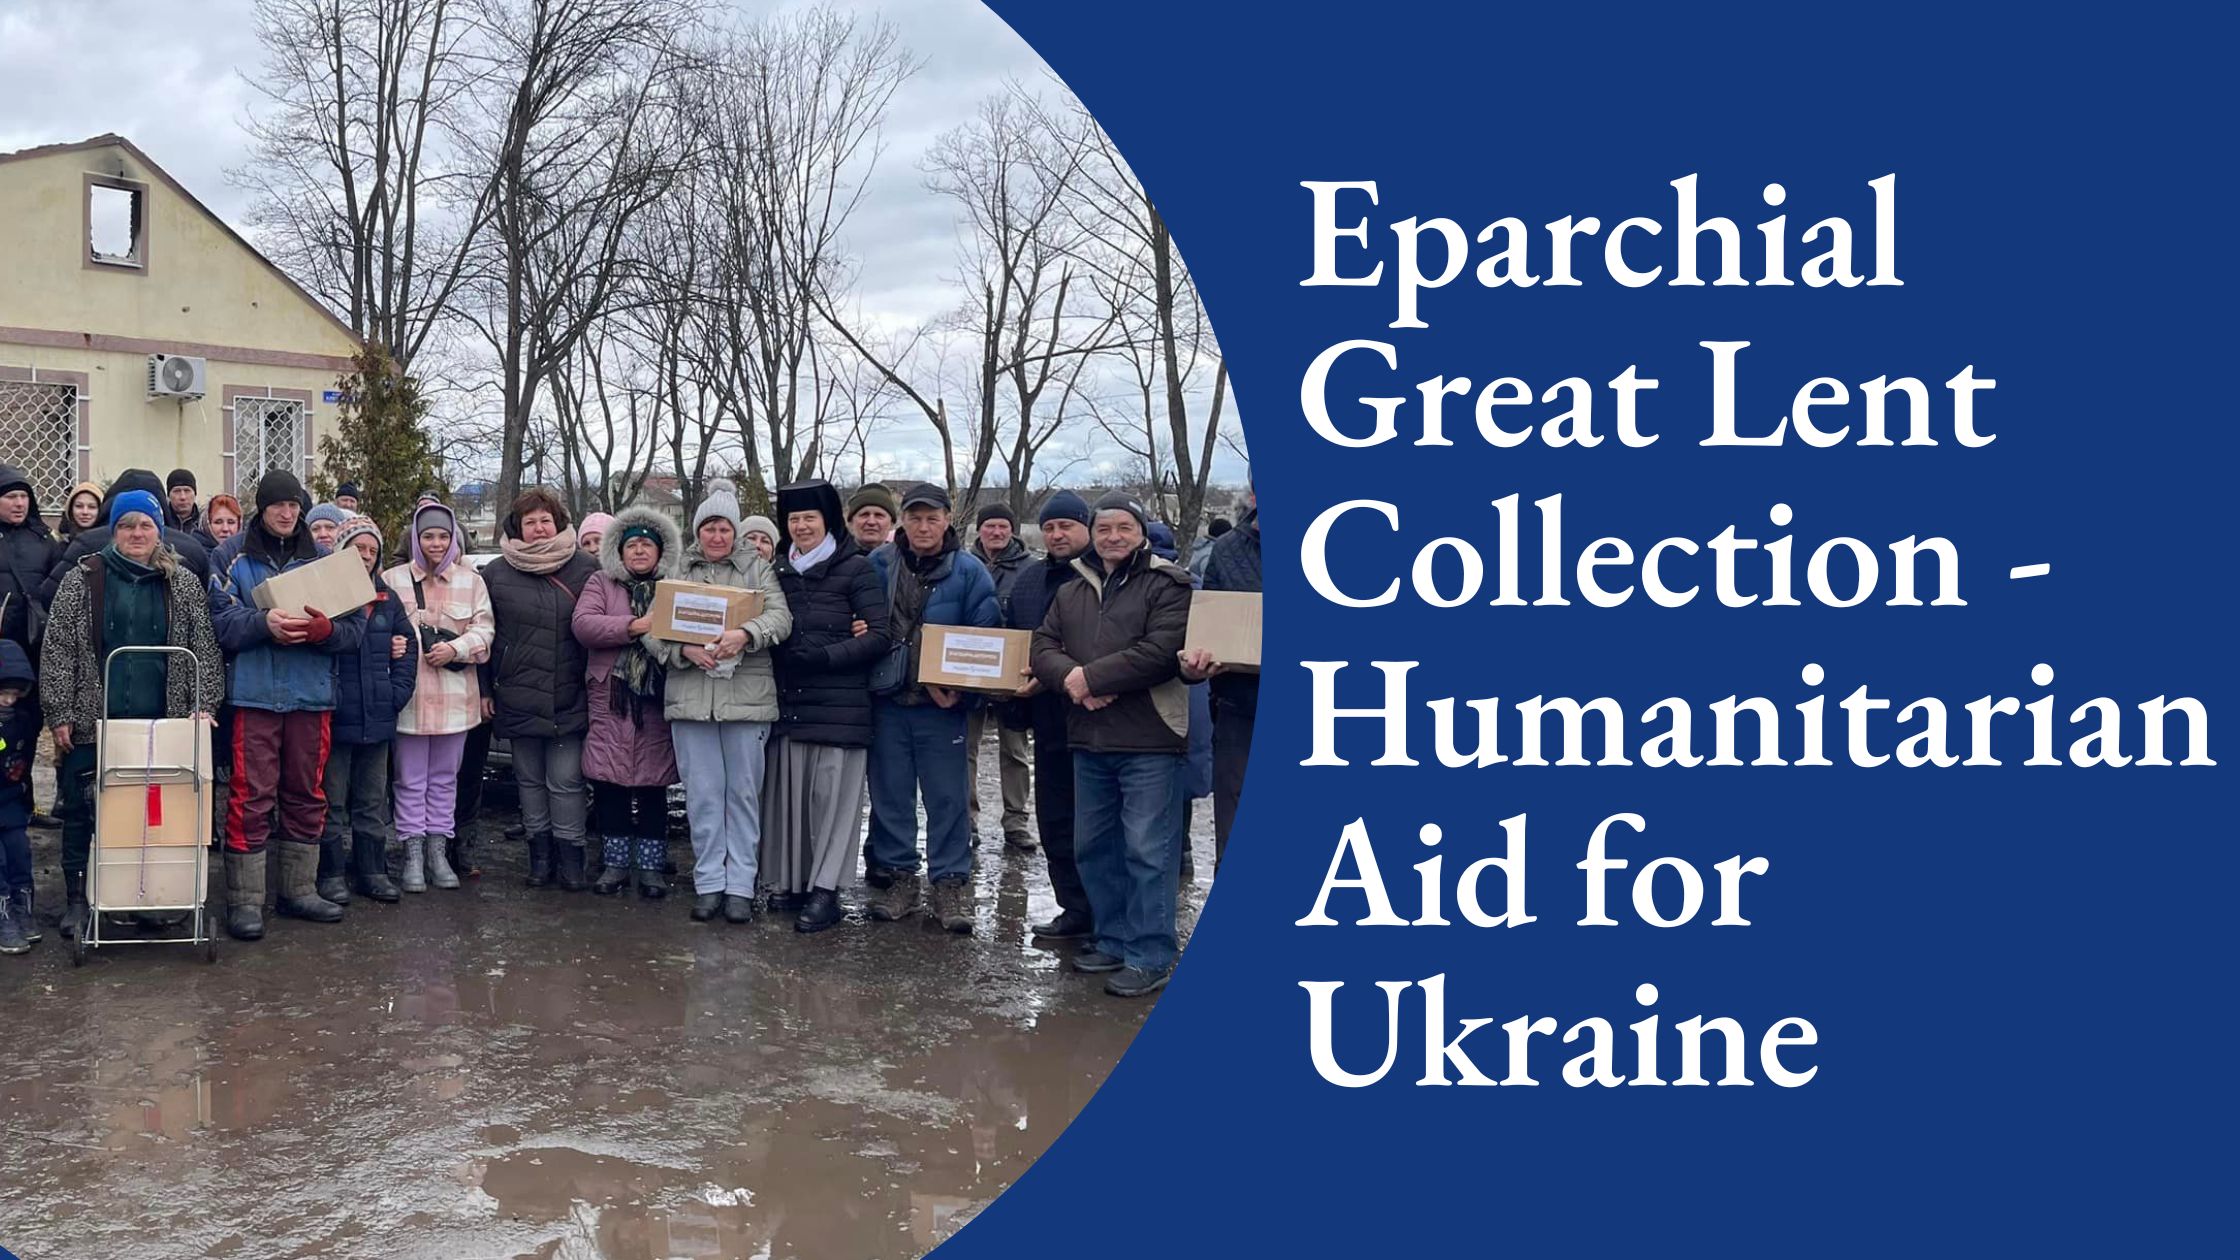 Eparchial Great Lent Collection - Humanitarian Aid for the People of Ukraine